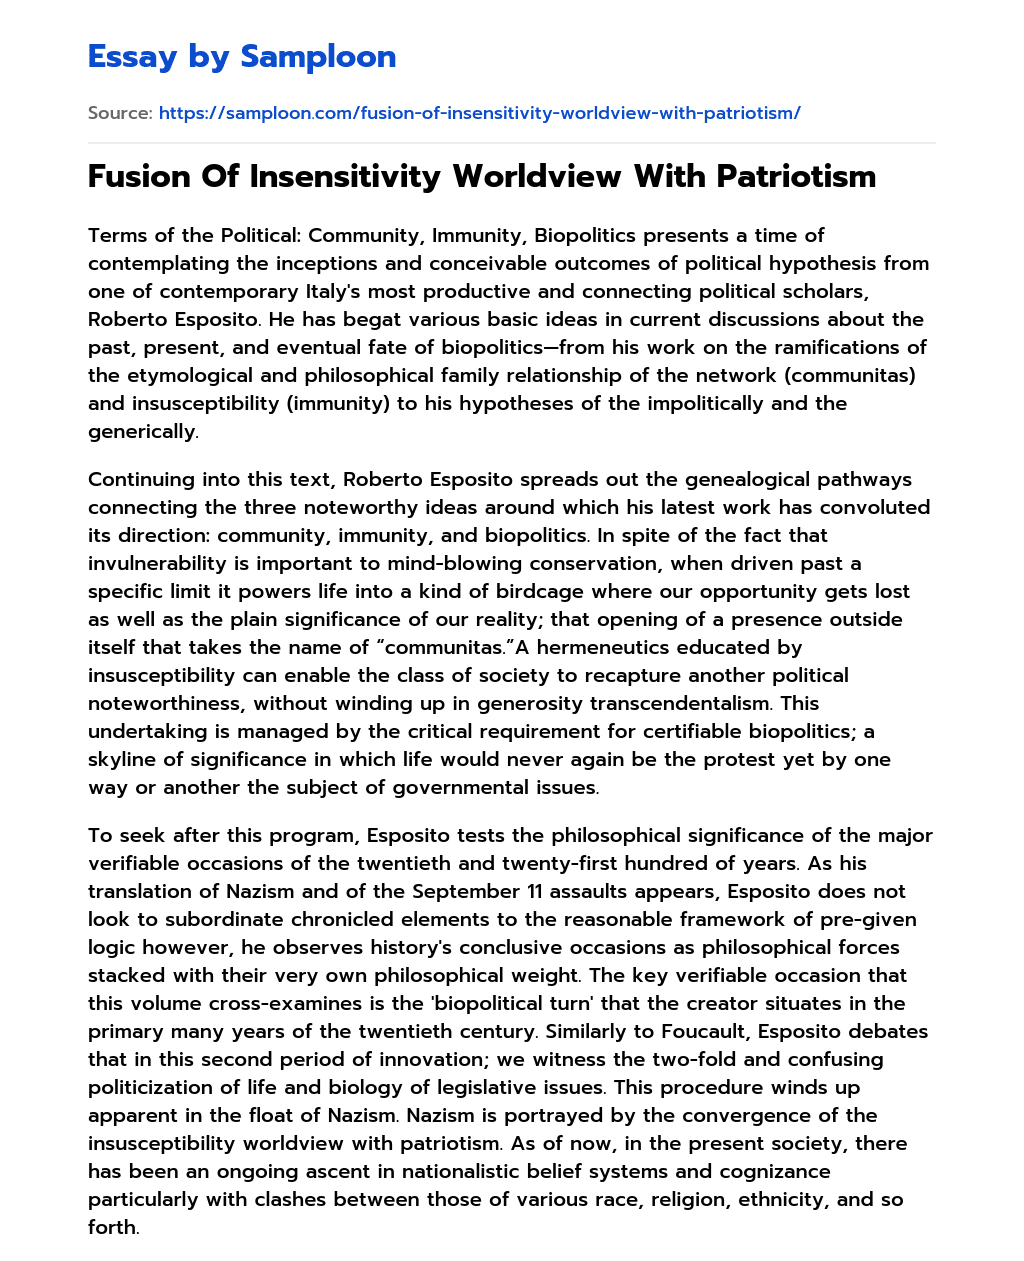 Fusion Of Insensitivity Worldview With Patriotism essay